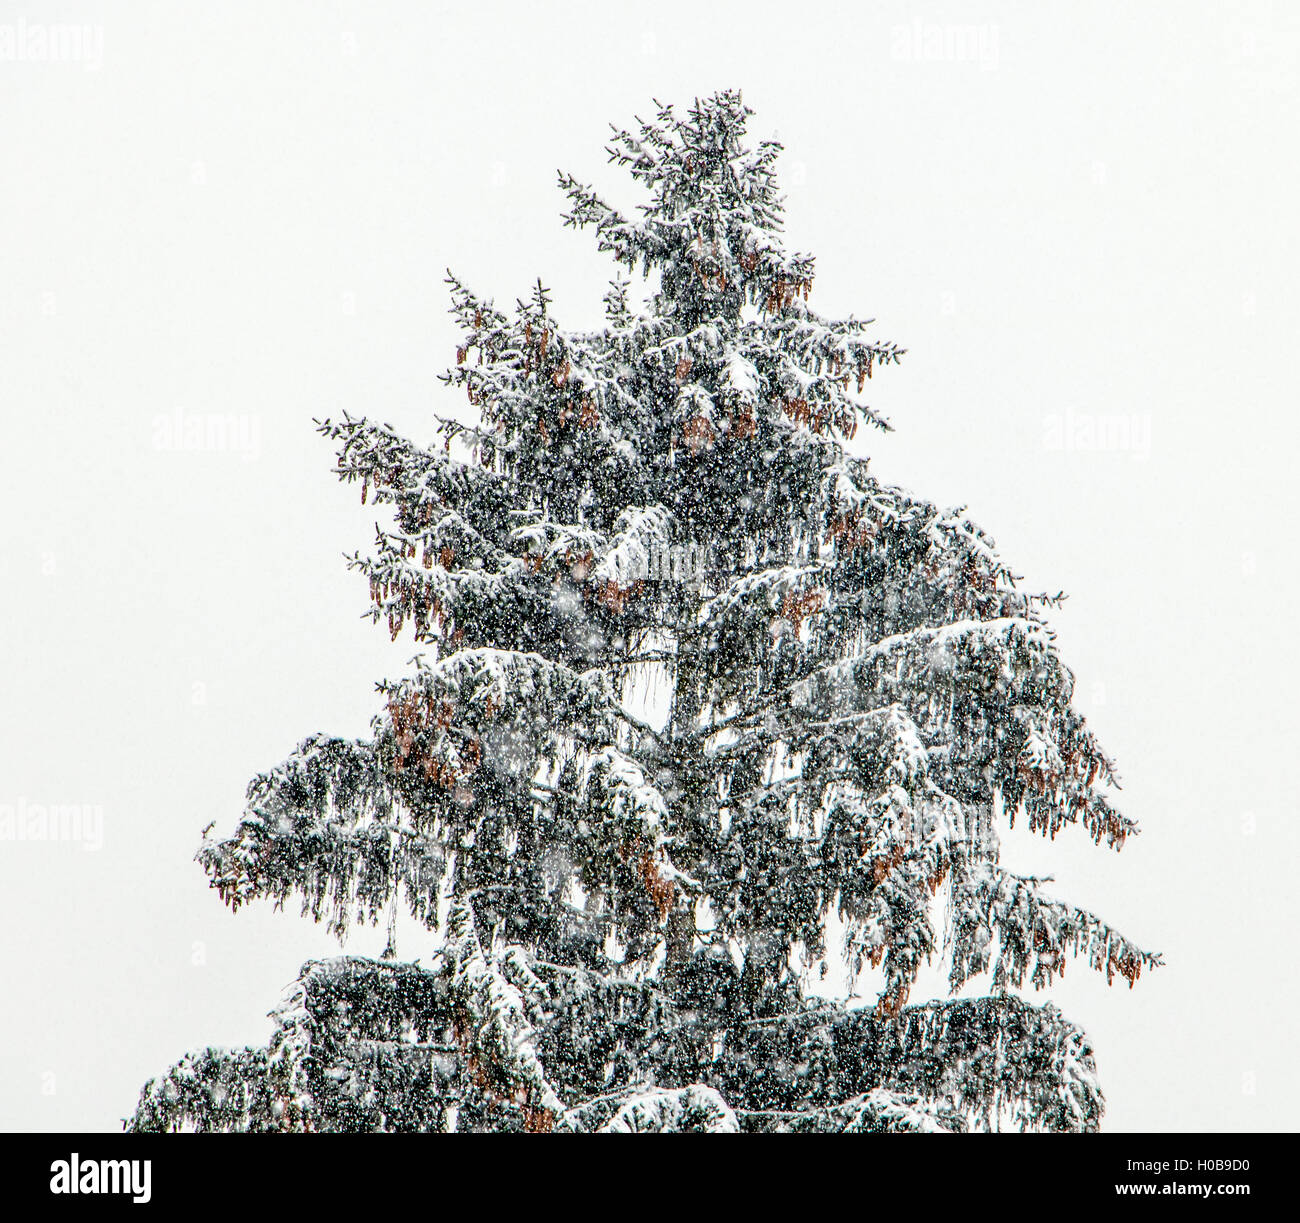 Heavy snowfall in the winter forest. Blizzard around spruce with cones. Snow falls on evergreen tree. Stock Photo